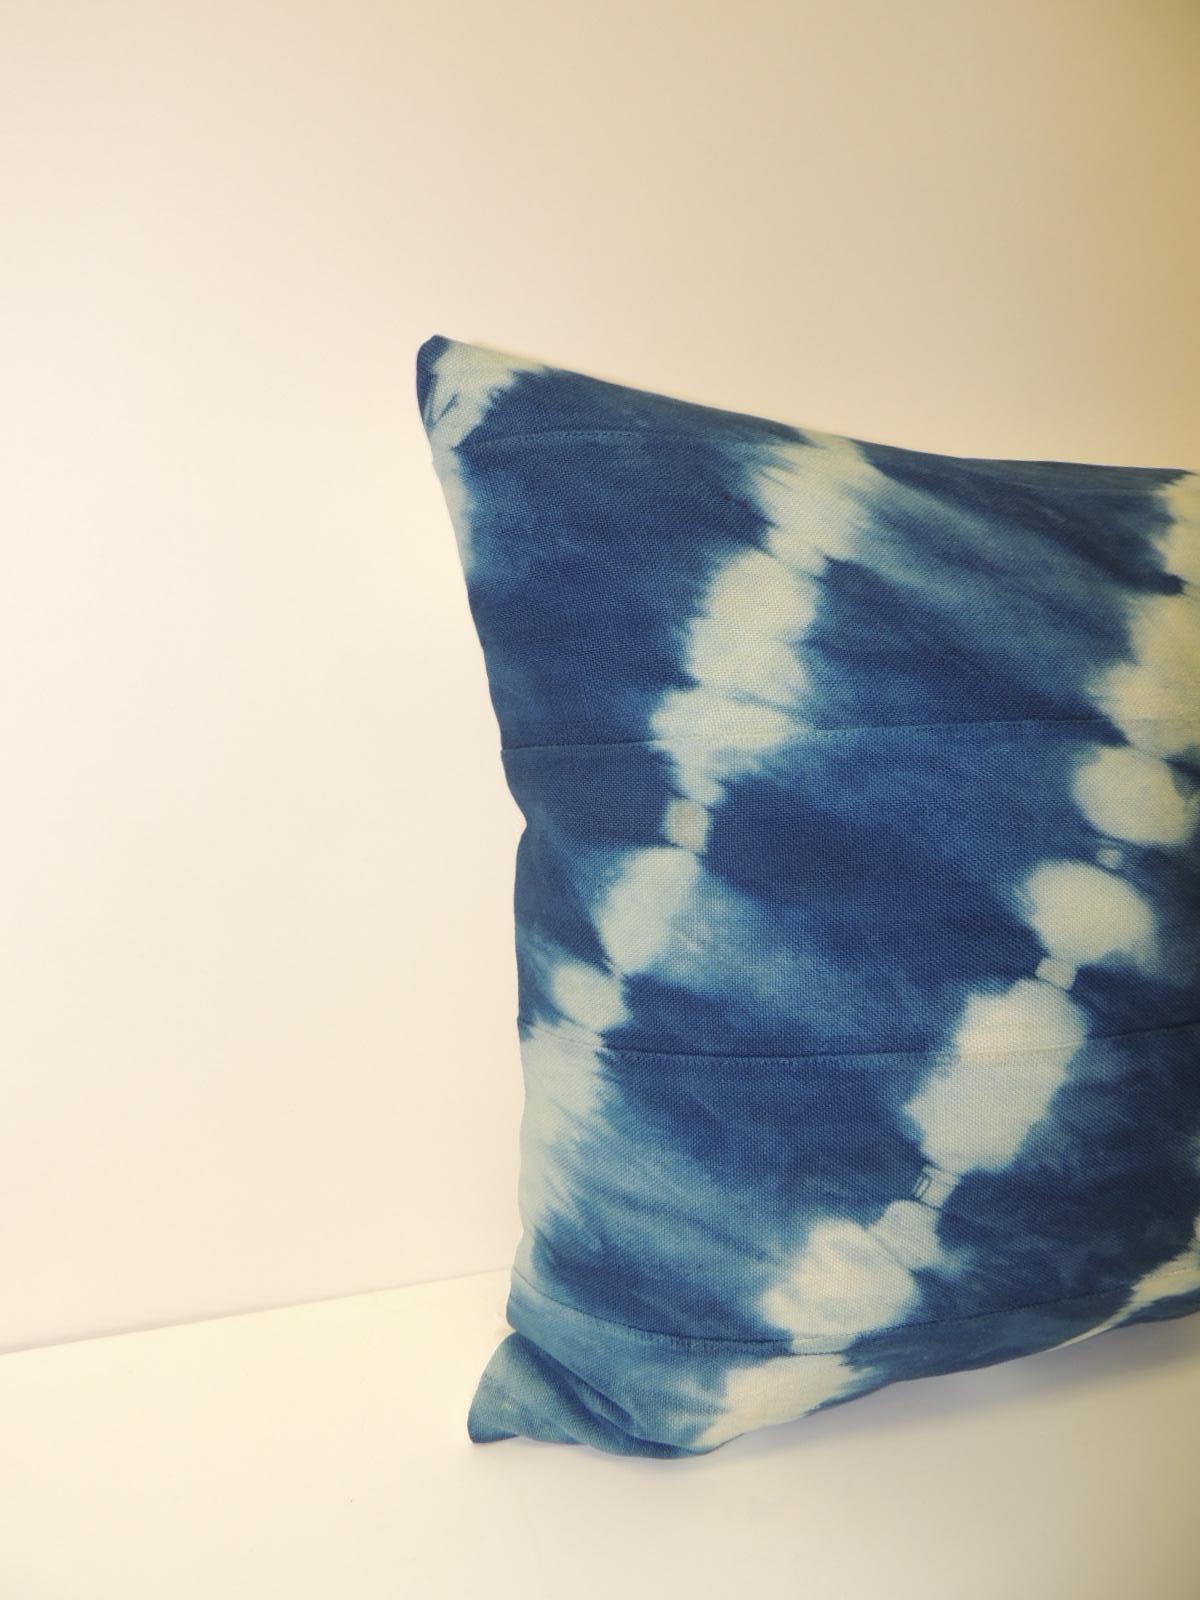 Vintage Indigo and White African Resist-dye Textile Decorative Pillow
Sunburst pattern square pillow with textured white silk backing.
Decorative pillow handmade and designed in the USA.
 Closure by stitch (no zipper) with custom made feather/down